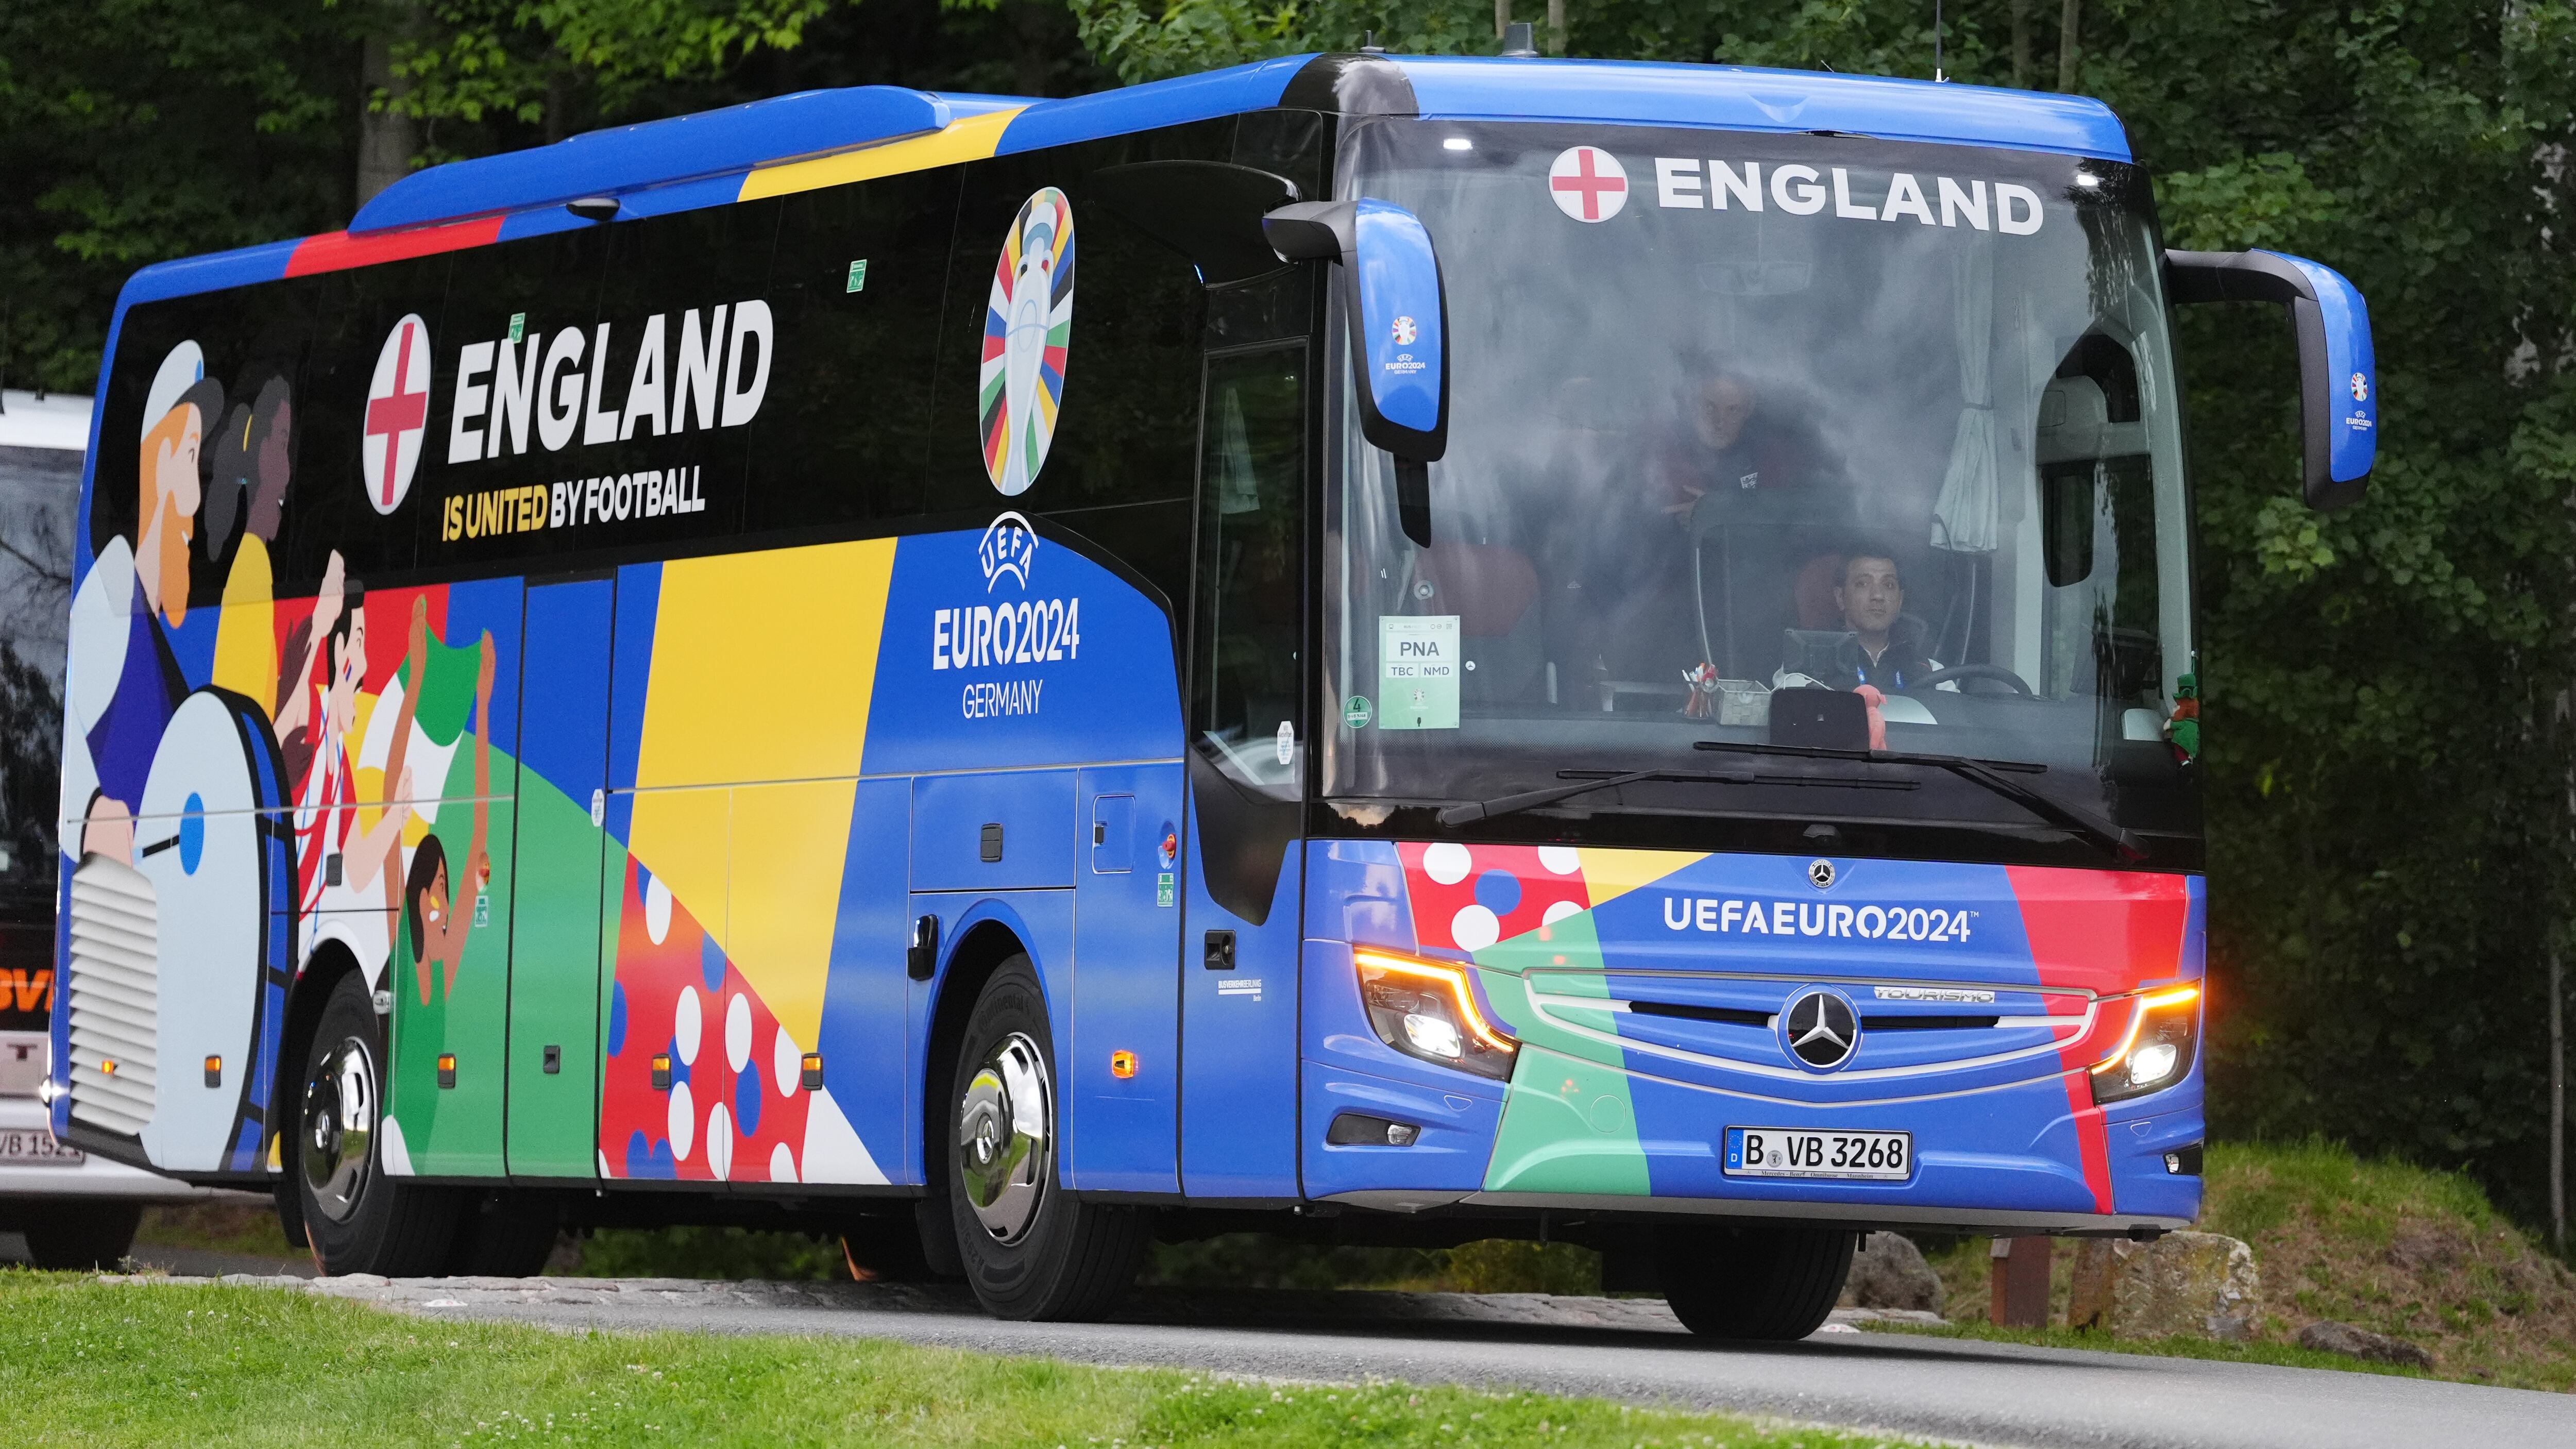 The England team bus arrives at their training base in Germany